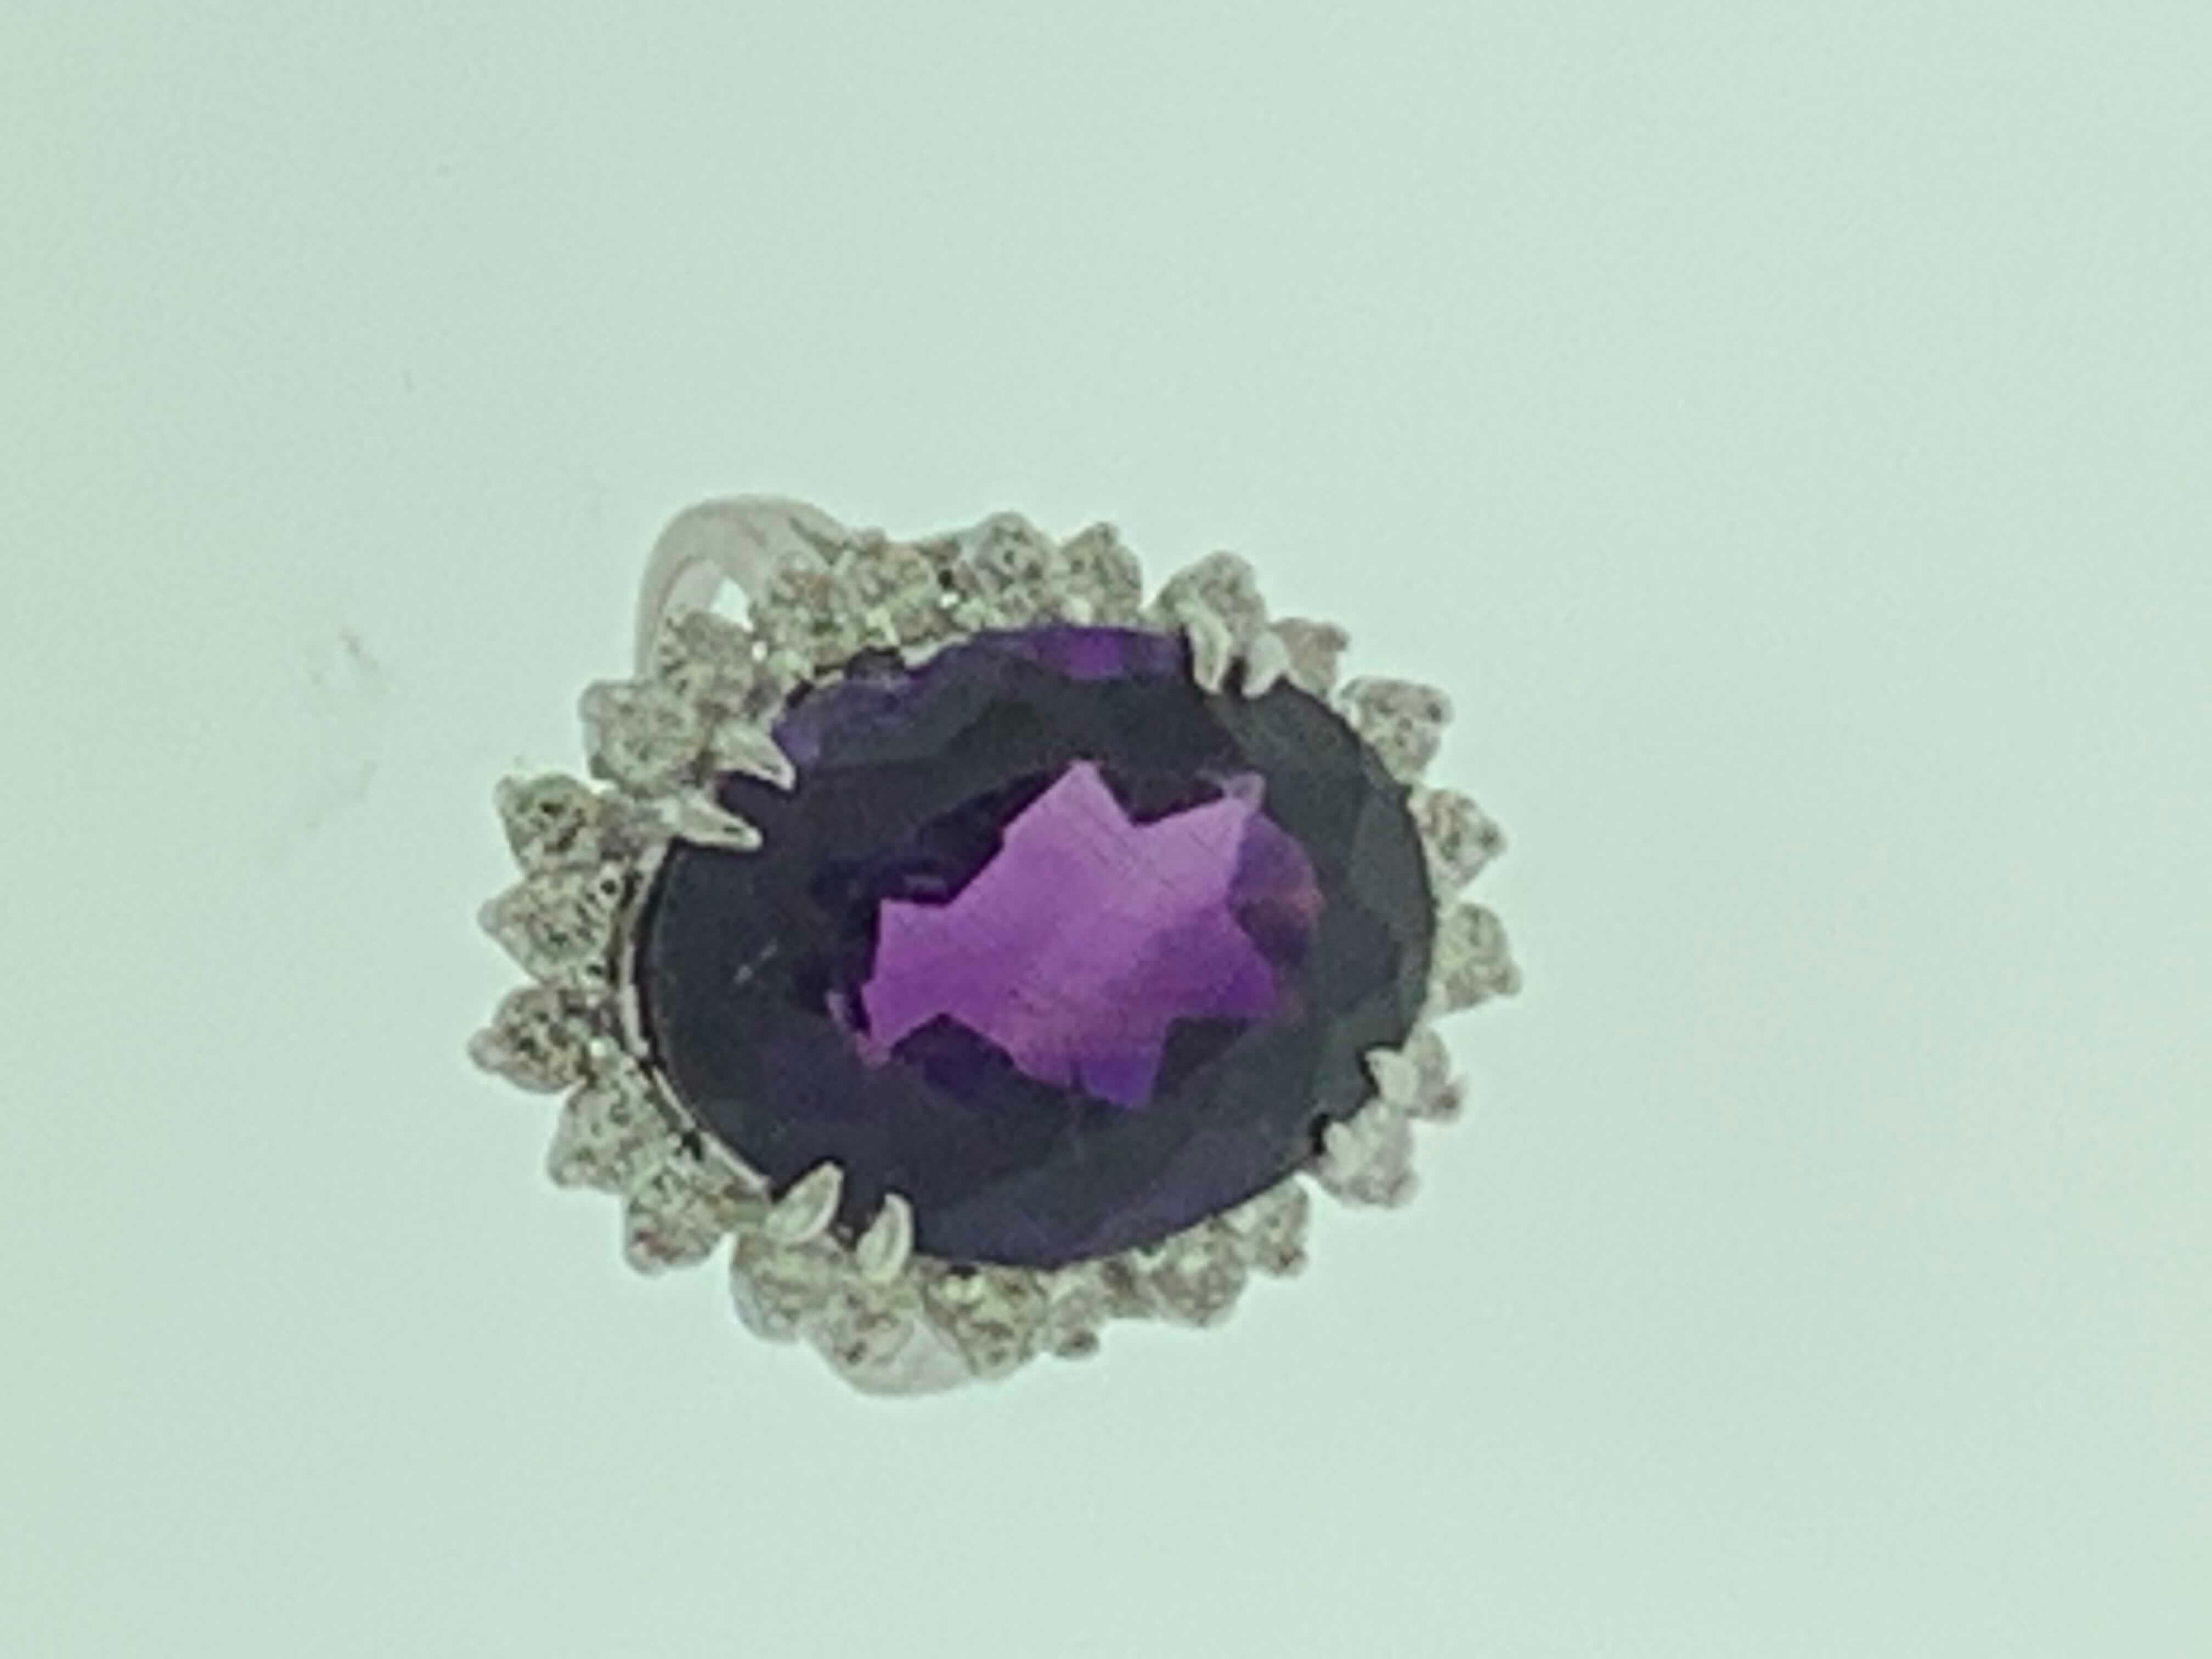 12.5 Carat Amethyst and Diamond Cocktail Ring in 14 Karat White Gold 1970s For Sale 6